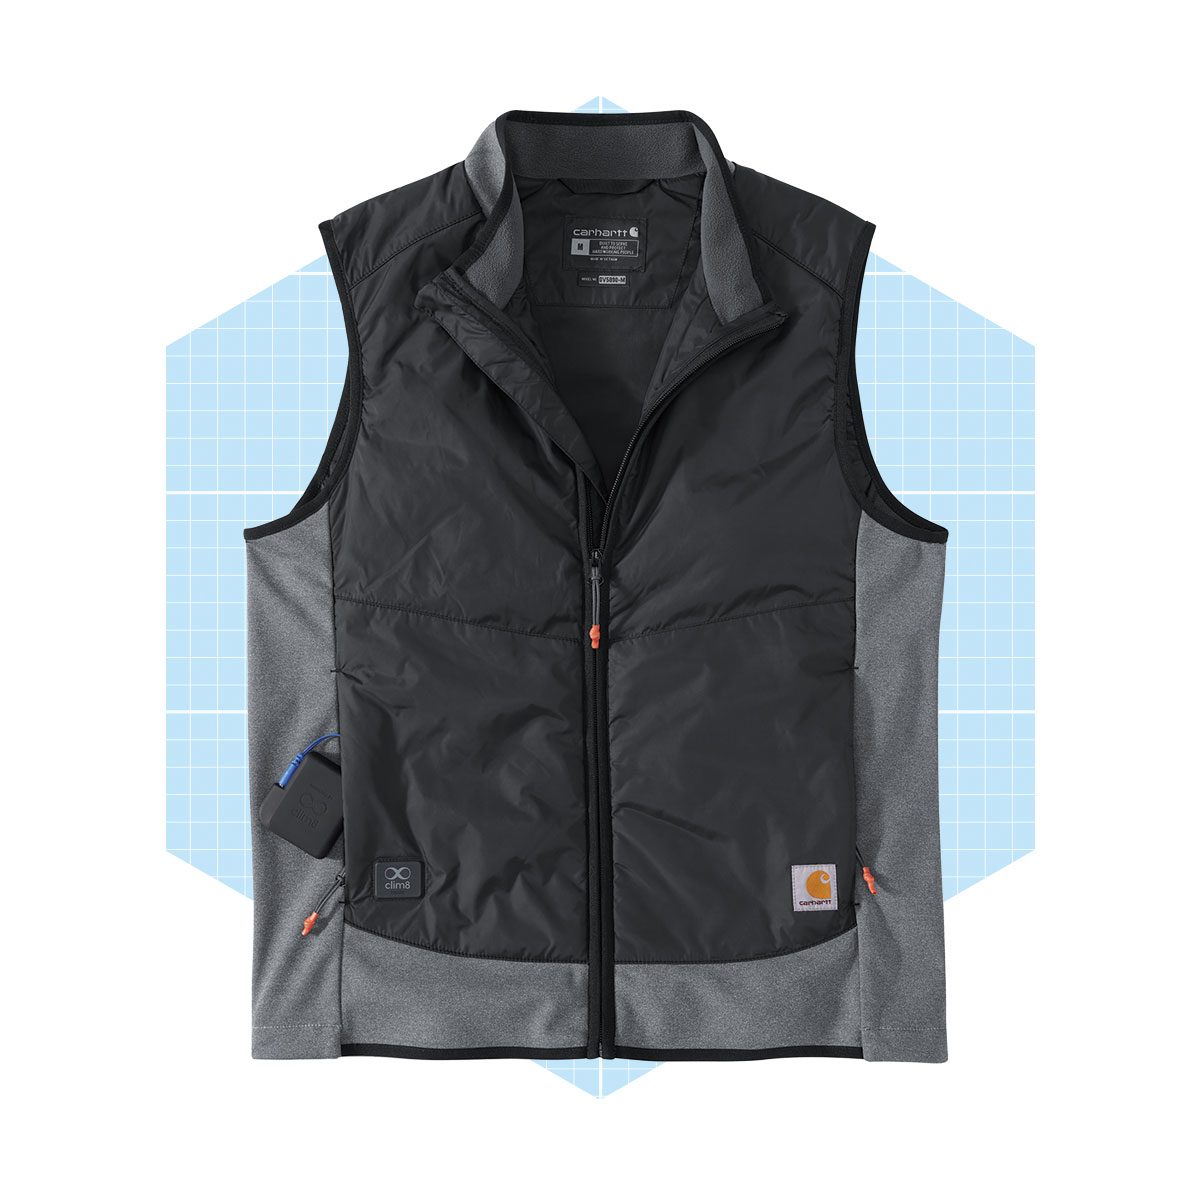 Carhartt's New Smart Vest Uses AI to Keep You Warm on the Job